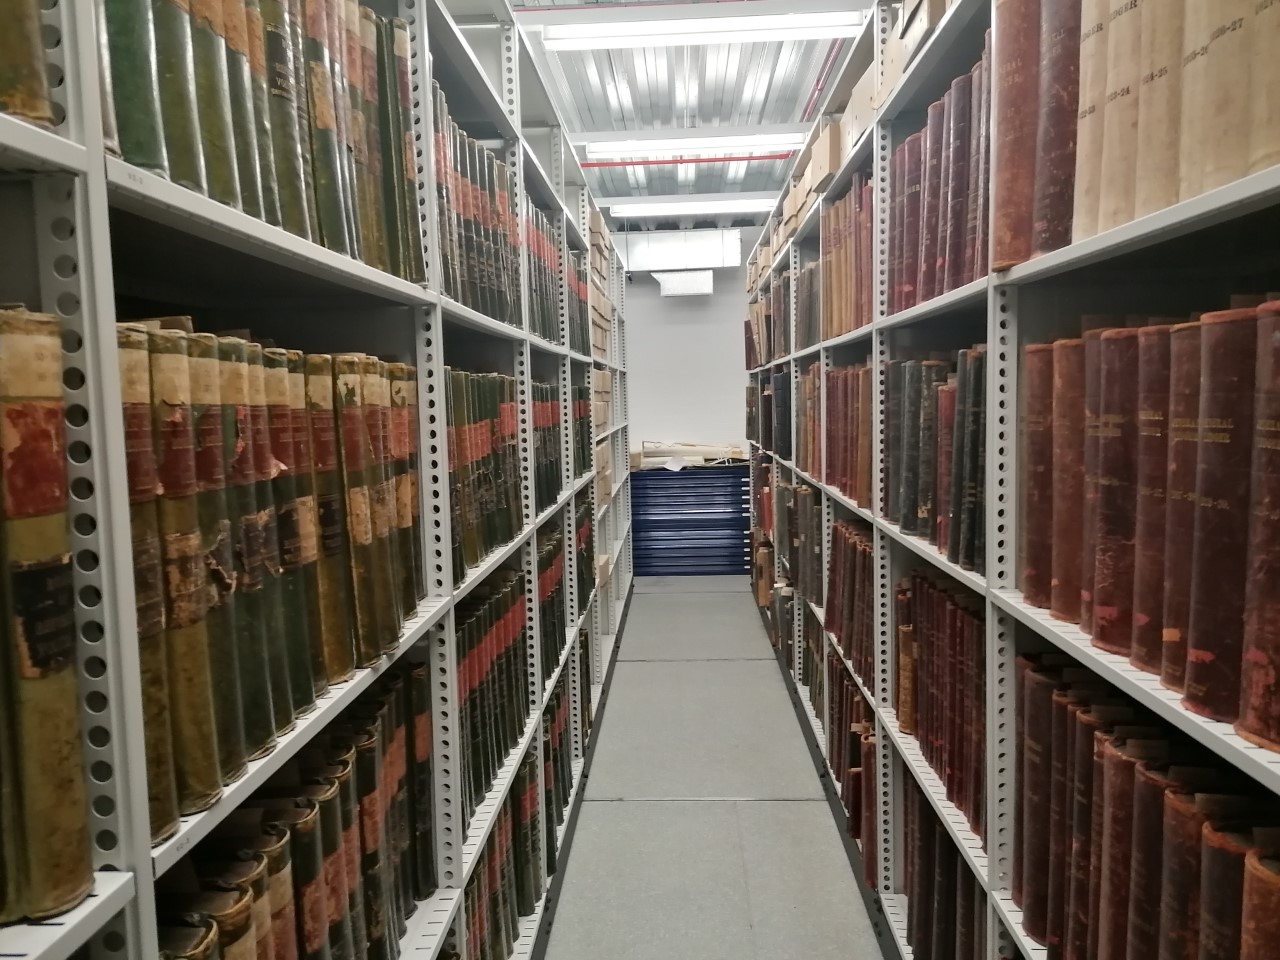 Photograph of one of the archives repositories at the Treasure House in Beverley